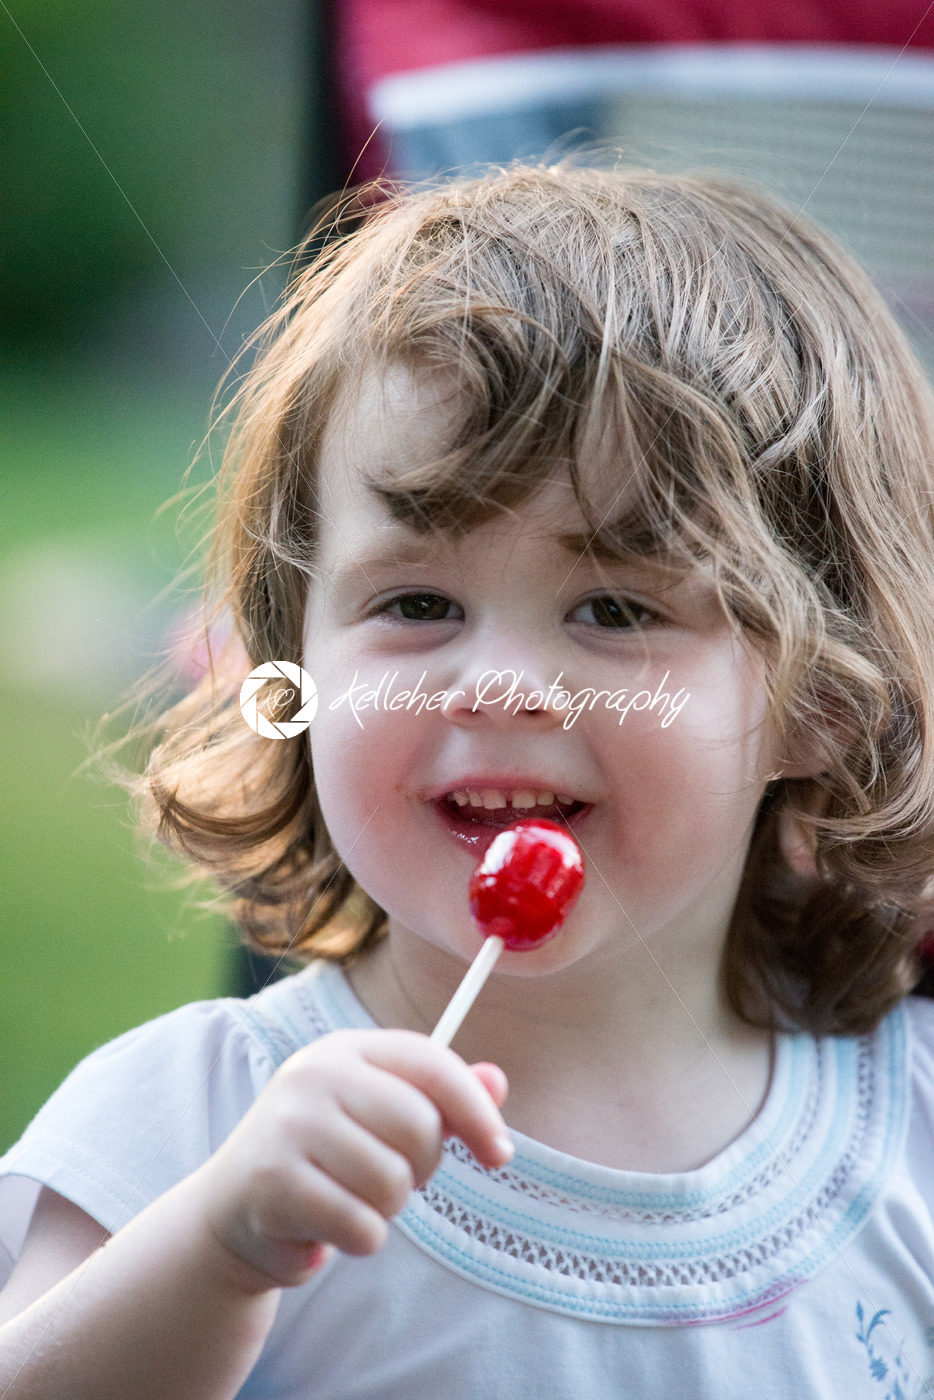 Cute little girl outside with big red lollipop. - Kelleher Photography Store